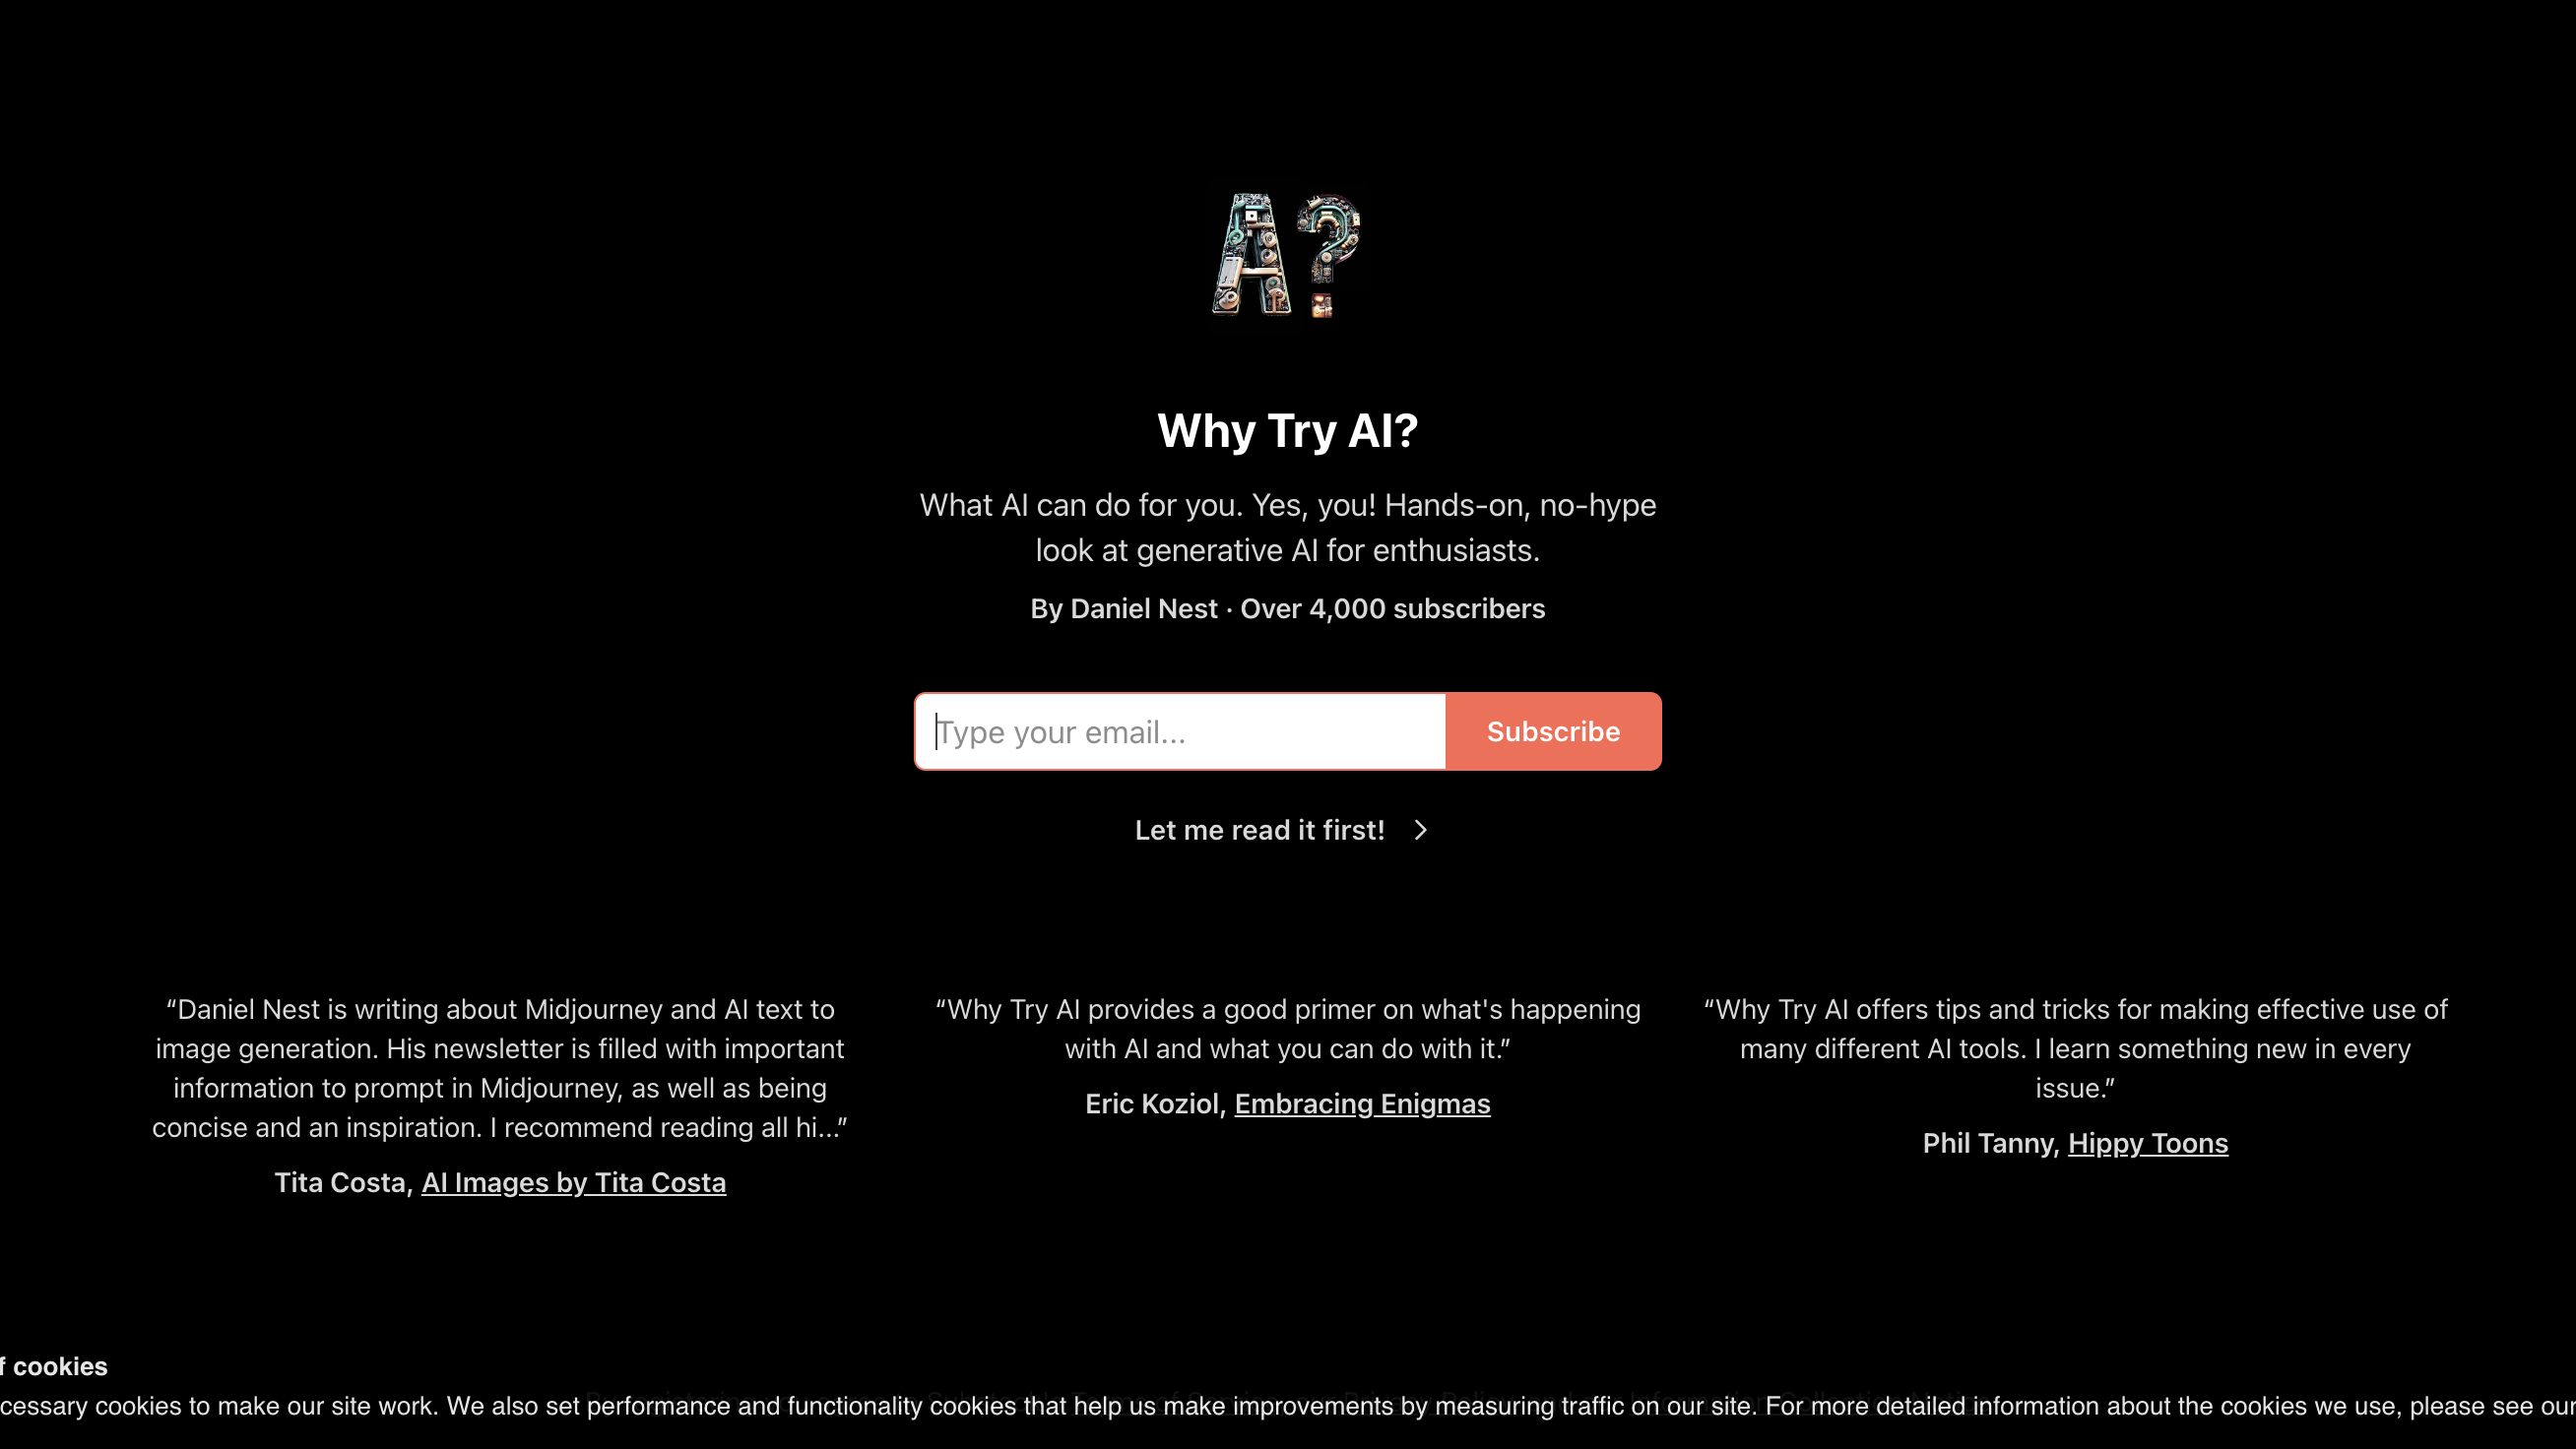 Why Try AI homepage